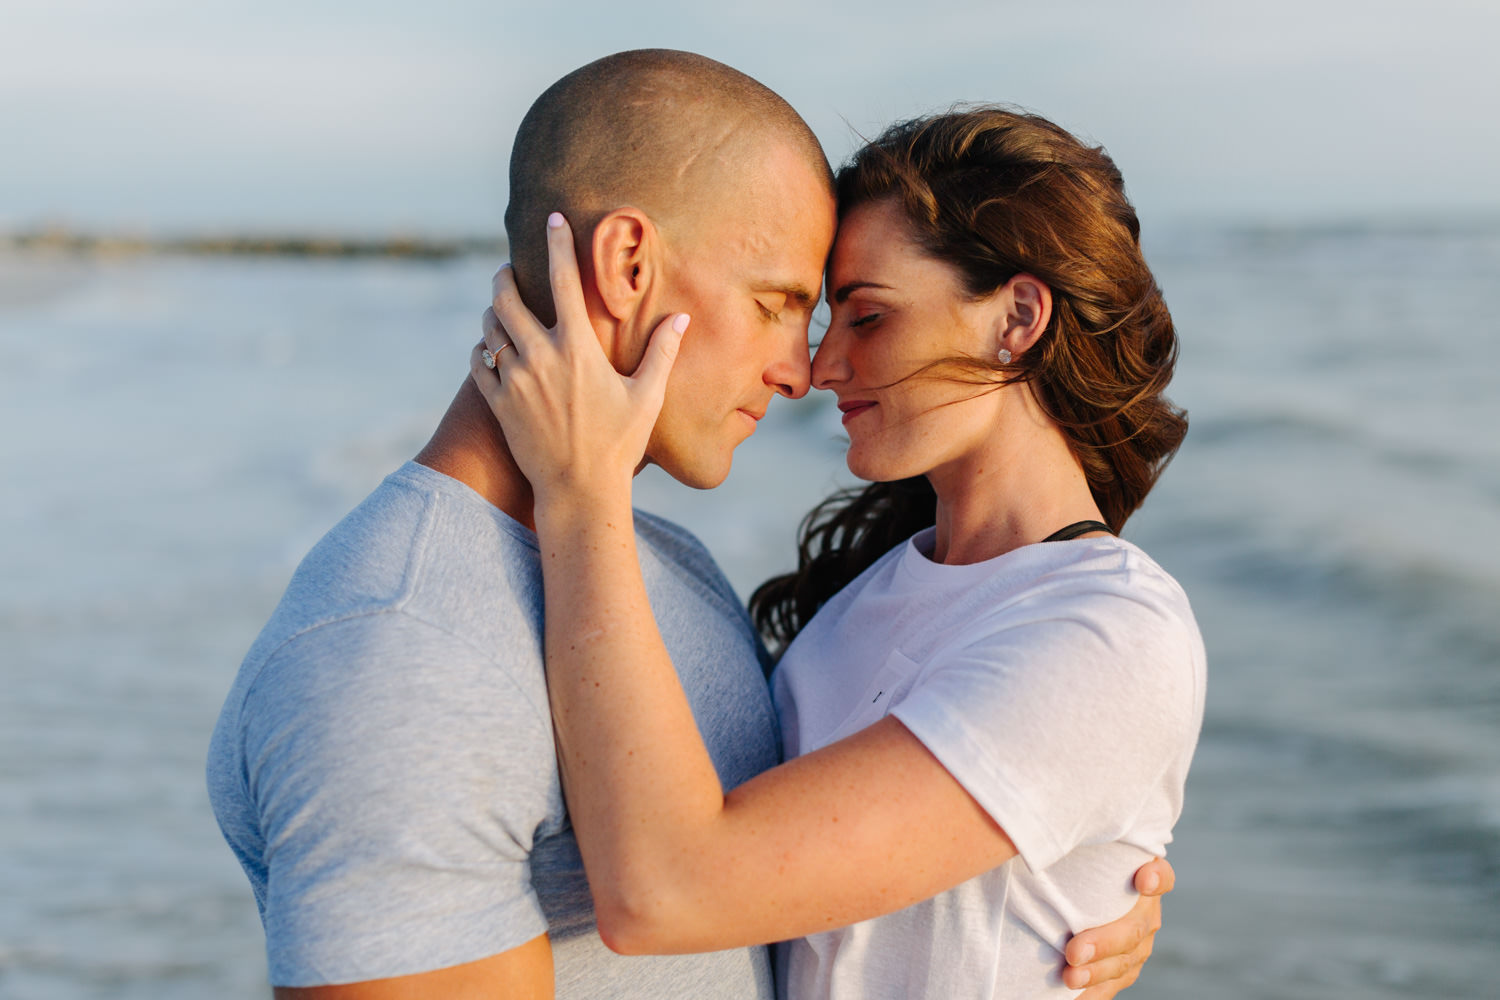  beach-sunset-engagement-photos-jake-and-katie-photography 